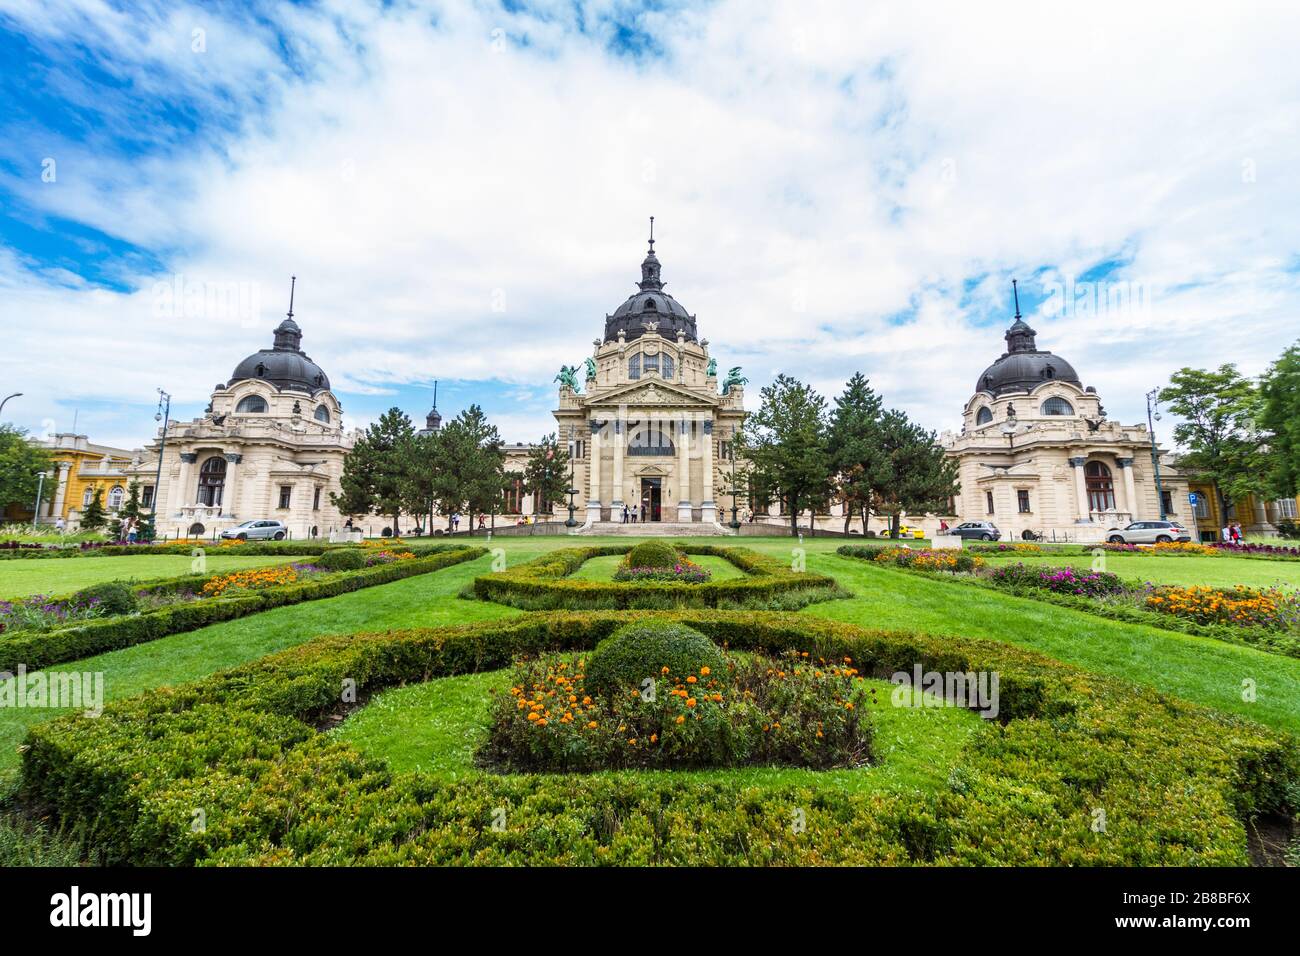 Facade of Szechenyi thermal bath building and formal gardens in City Park, Budapest, Hungary, landscape, wide angle Stock Photo